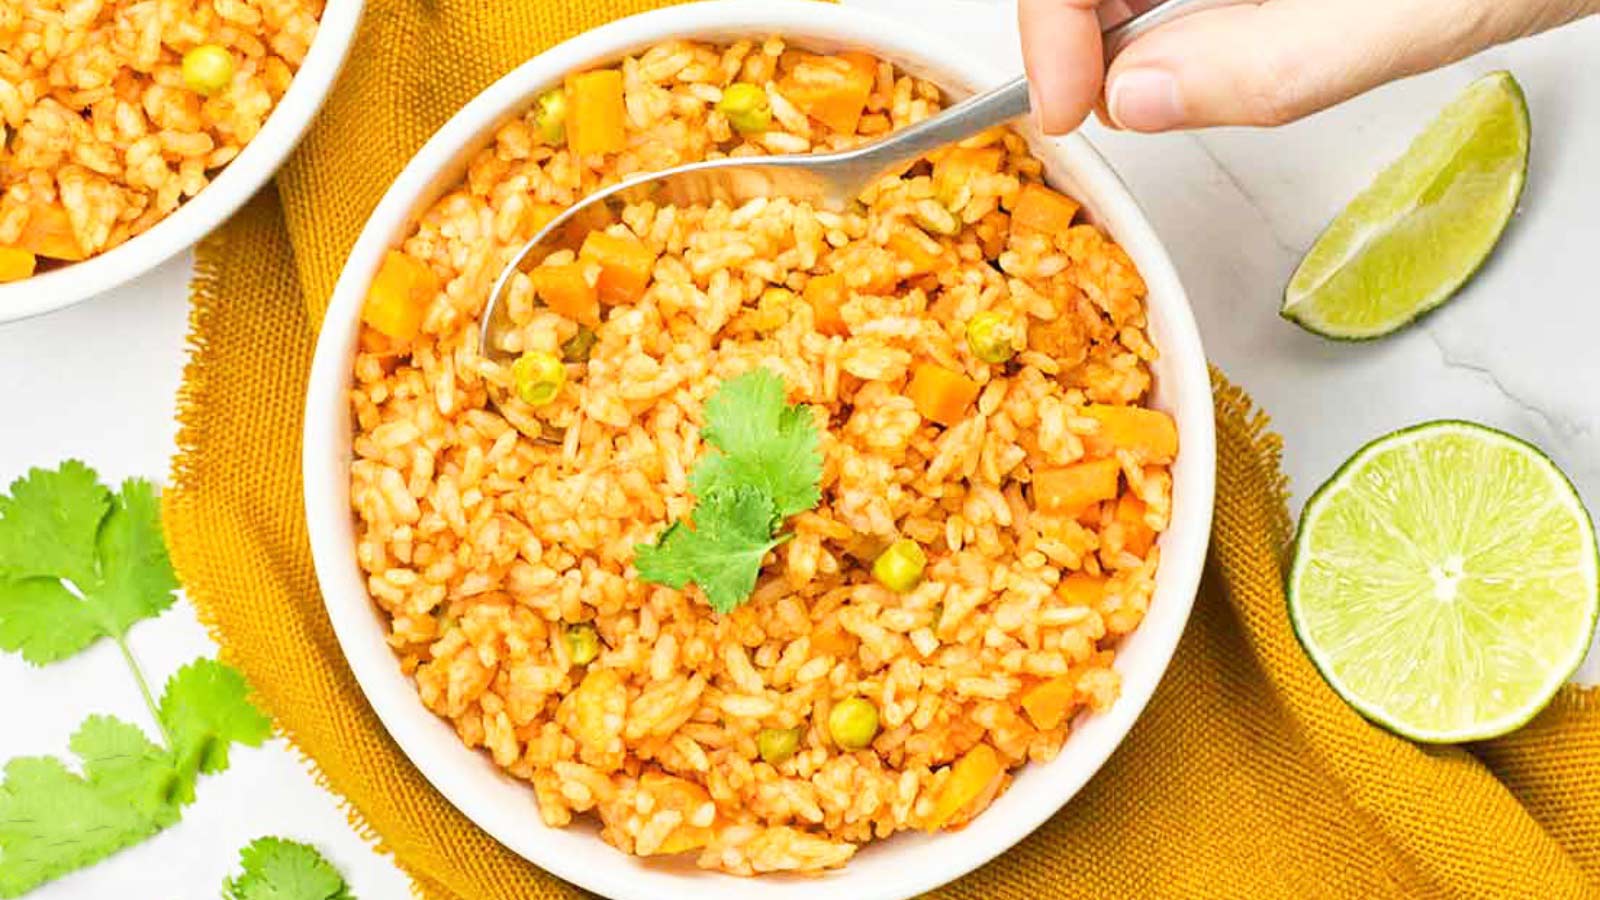 A hand spoons some Mexican rice out of a white bowl full of it.